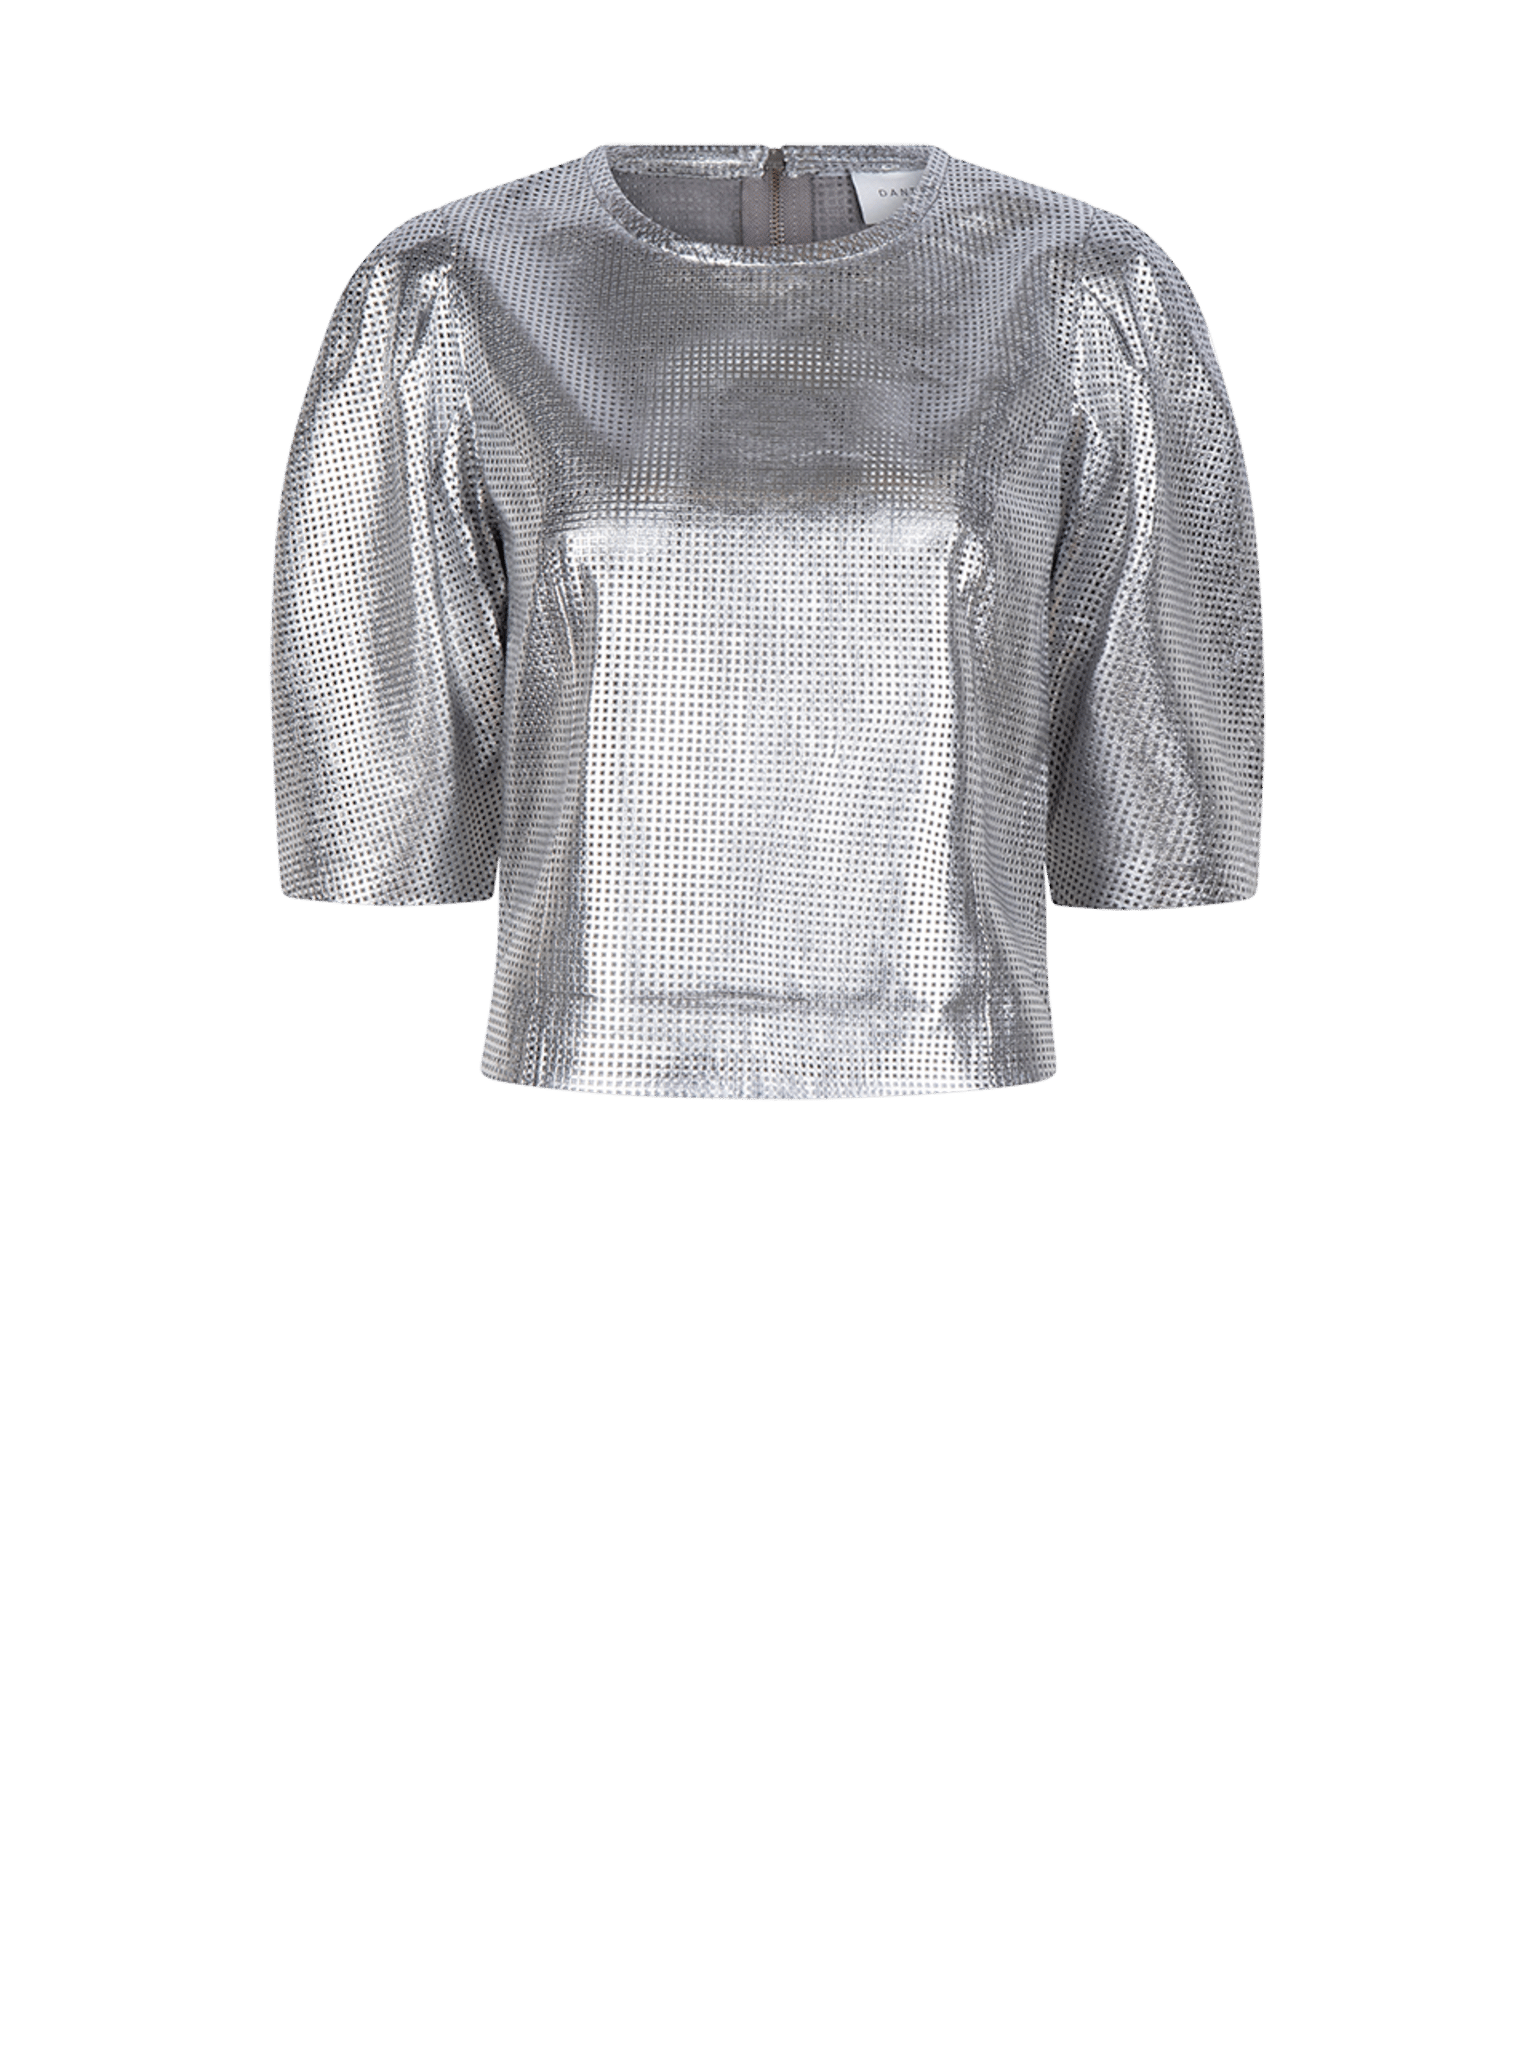 Dante 6 D6 arya perforated leather top